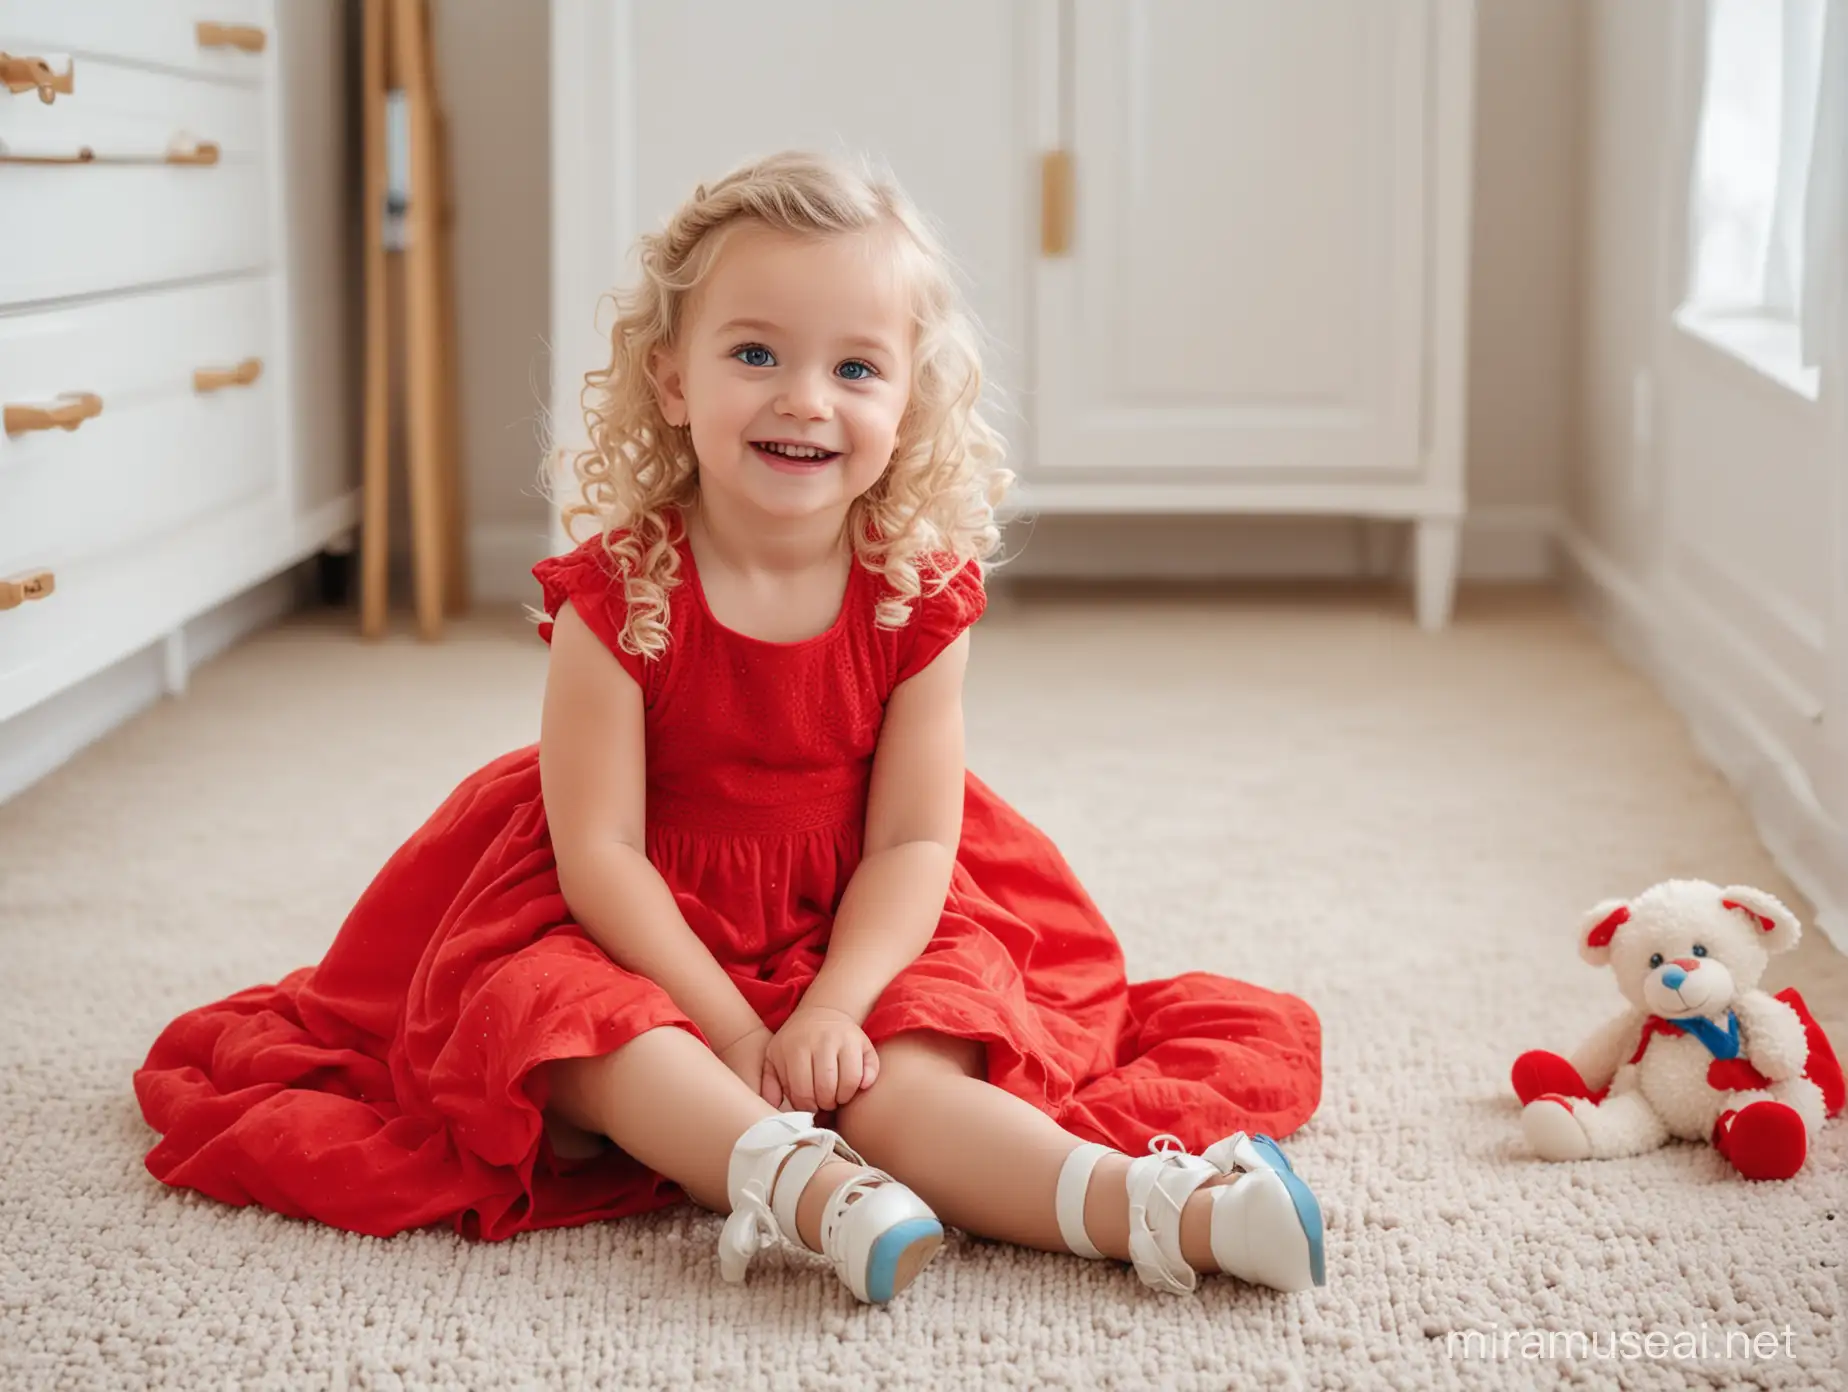 a cute girl three years old sitting on the soft beige carpet in the bright room with white walls, toys are around her on the floor, she is happy, in a red dress,  white shoes, blonde curls, blue eyes, real photo, cozy atmosphere